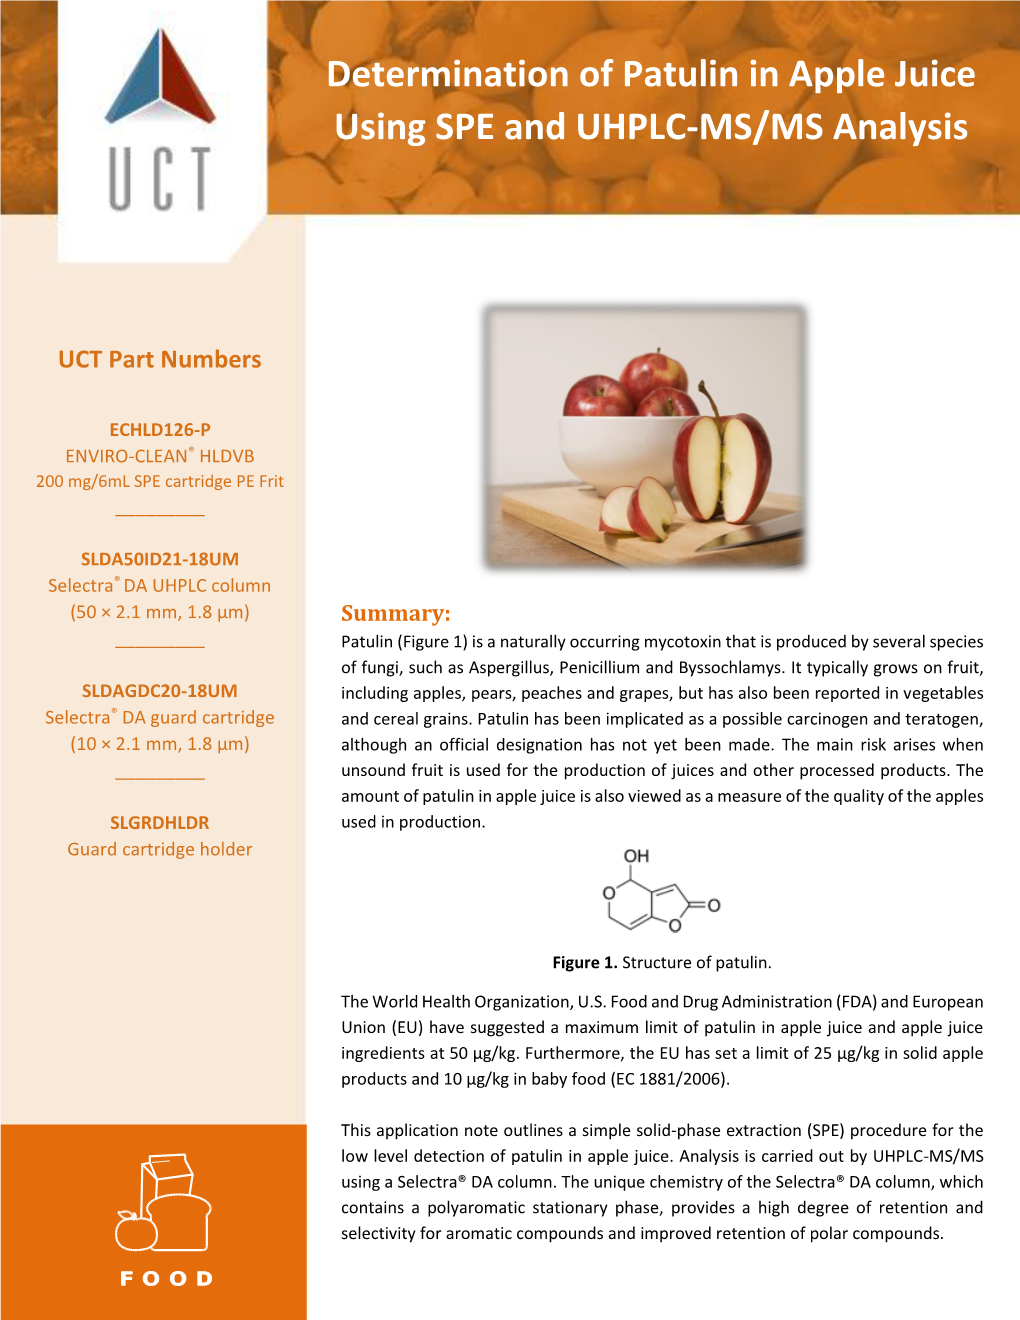 Determination of Patulin in Apple Juice Using SPE and UHPLC-MS